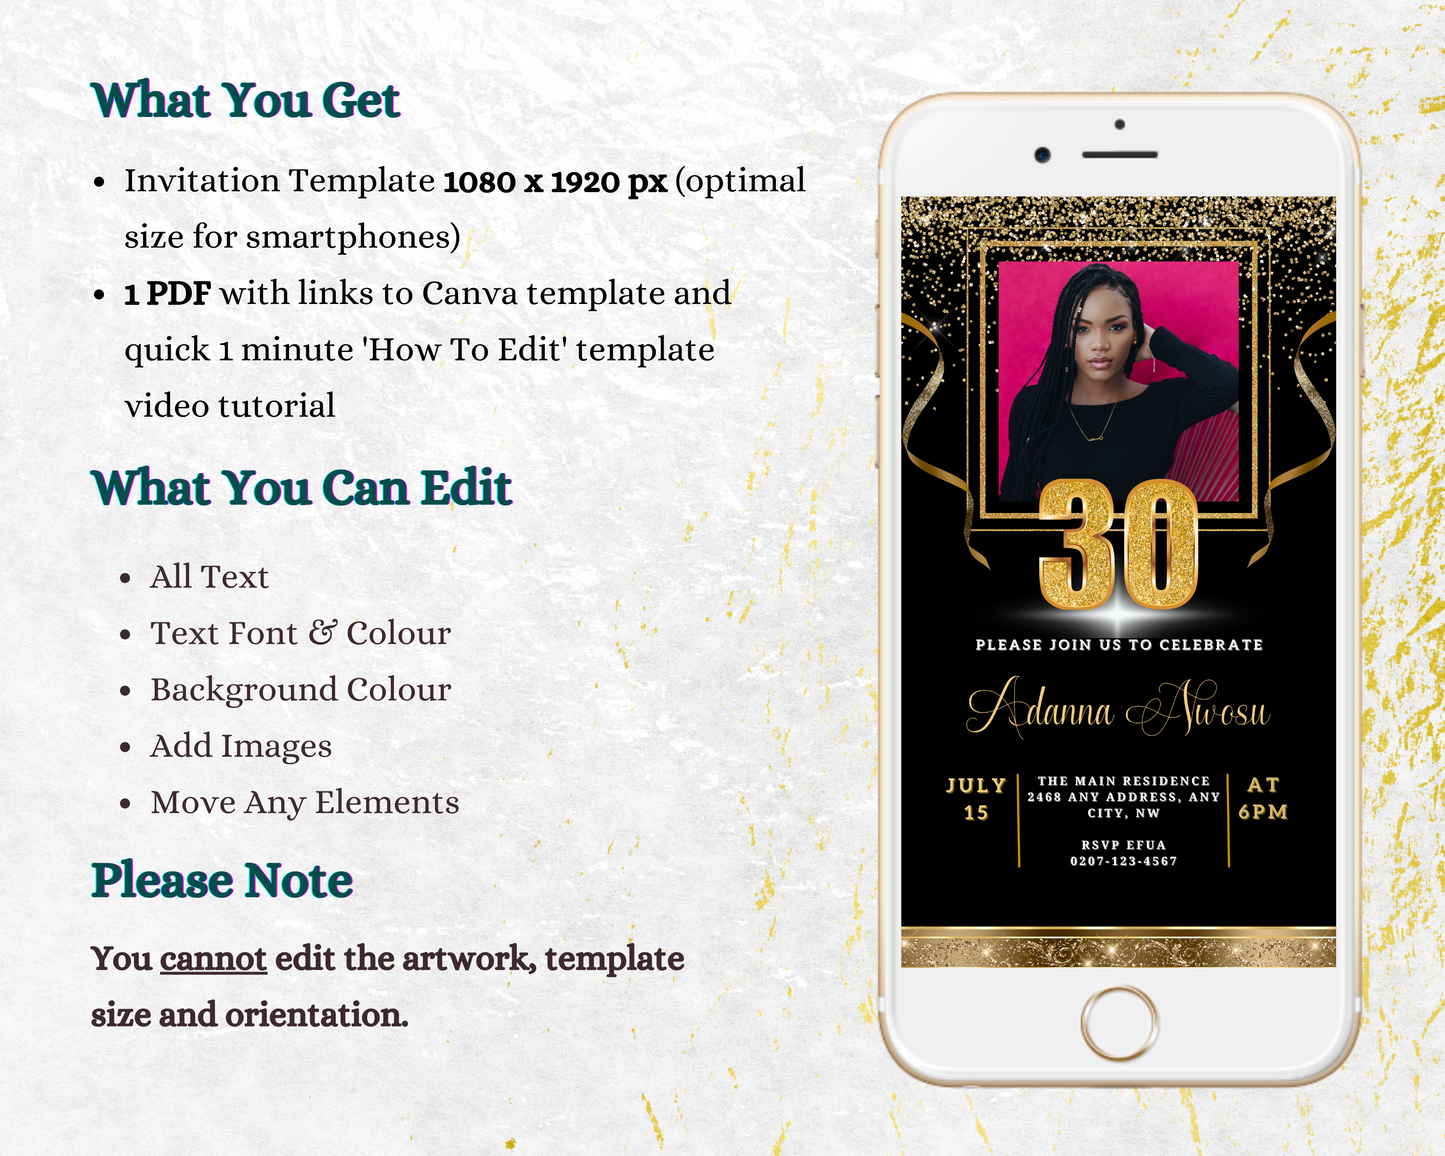 Customizable Digital Black Gold Confetti 30th Birthday Evite displayed on a smartphone with a woman's photo, ready for personalizing and electronic sharing.